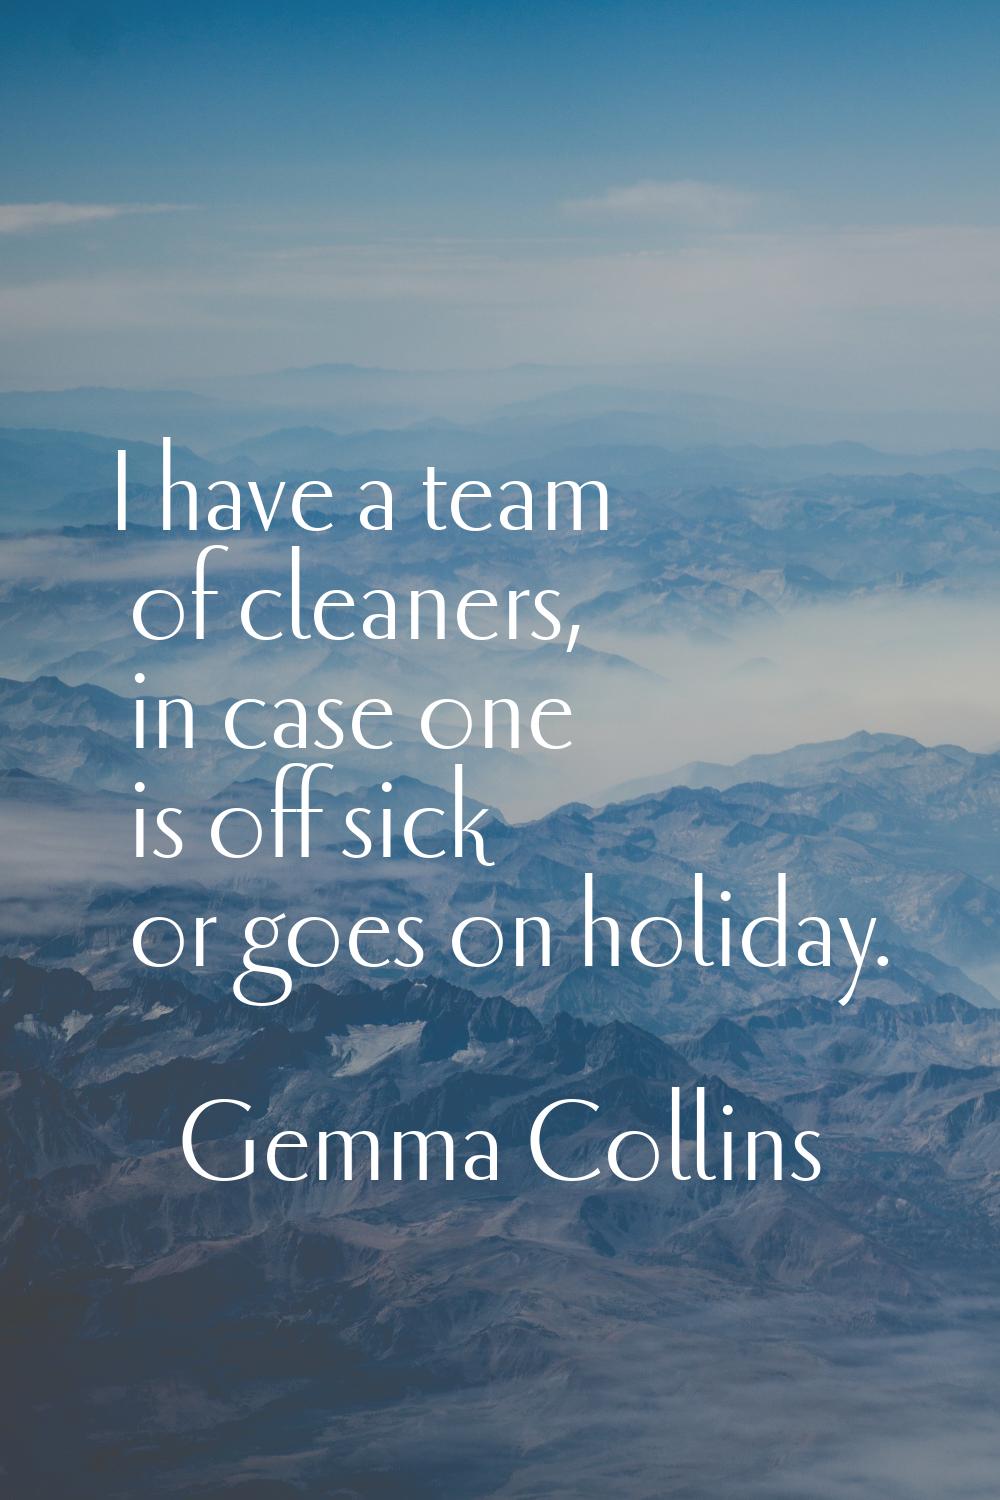 I have a team of cleaners, in case one is off sick or goes on holiday.